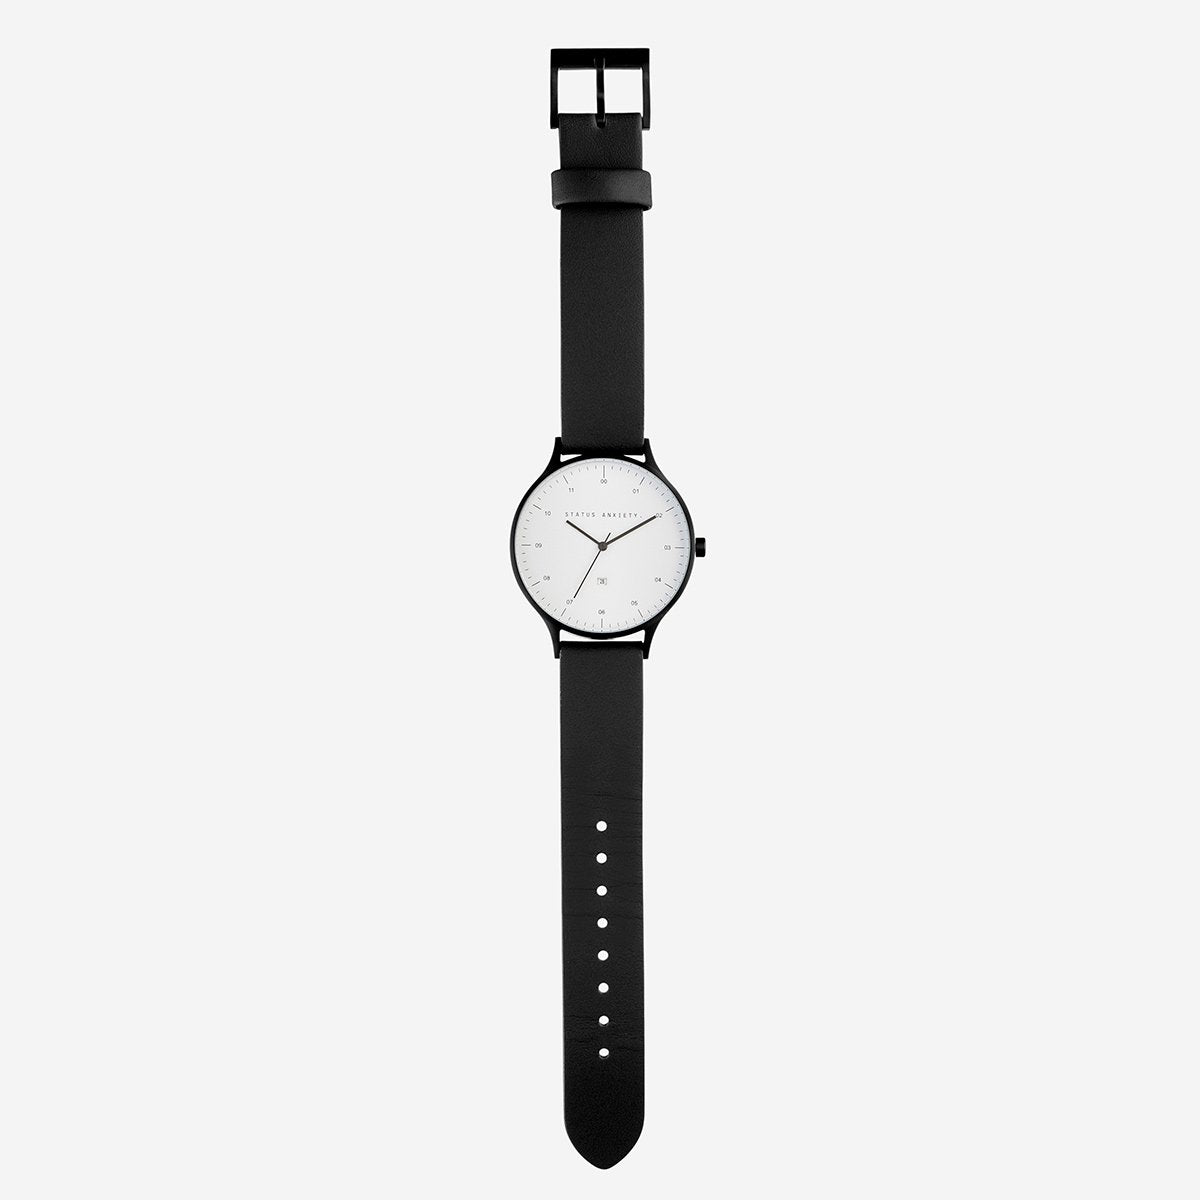 Status Anxiety Inertia Watch in Matte Black with White Face and Black Strap Fully Layed Out